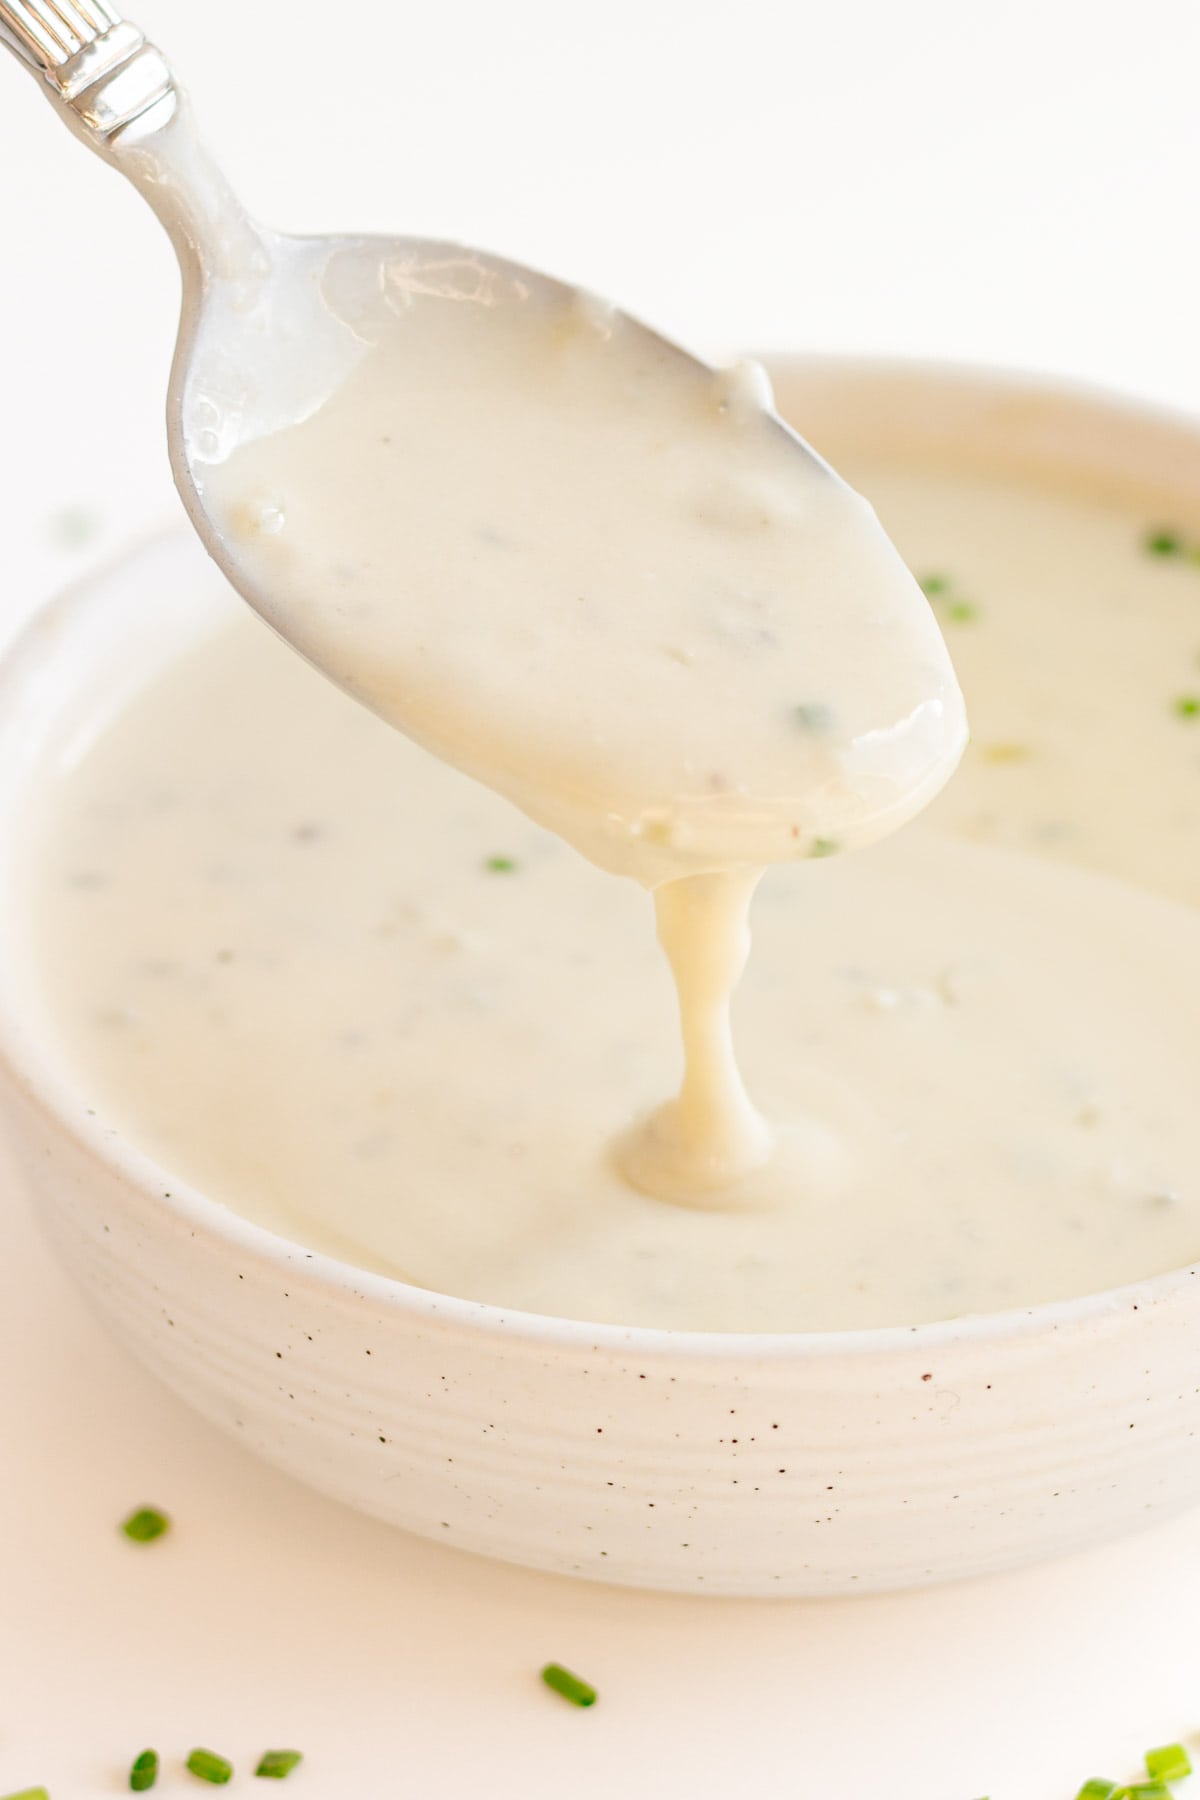 Gorgonzola sauce dripping off a spoon into a small bowl.